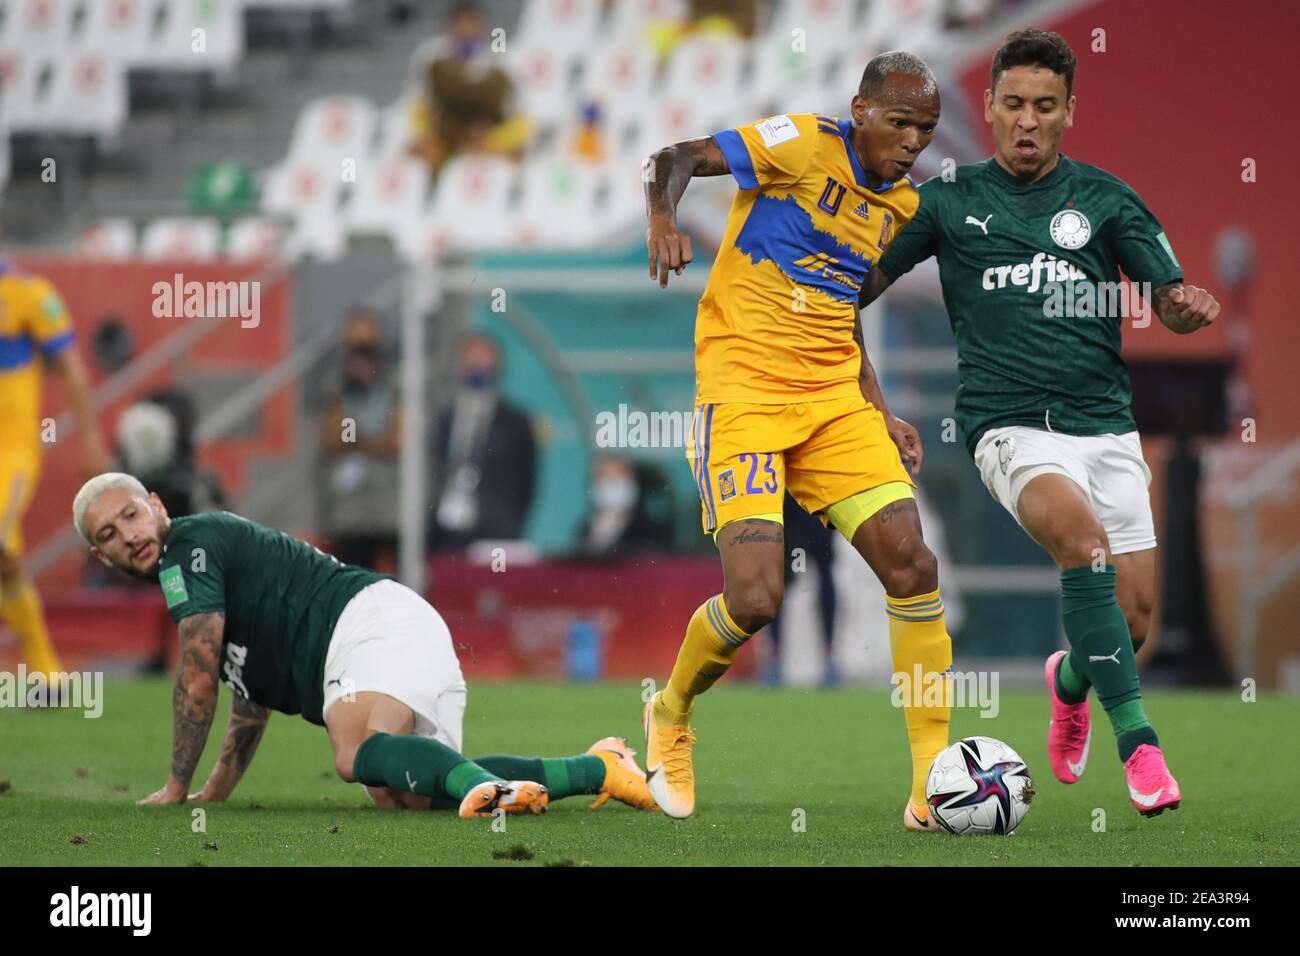 DOHA, QATAR - FEBRUARY 07: Luis Quiñones of Tigres UANL is chased down by Zé Rafael [left] and Marcos Rocha [right] of Palmeiras during the semi-final match between Palmeiras and Tigres UANL at Education City Stadium on February 7, 2021 in Doha, Qatar. (Photo by Colin McPhedran/MB Media) Stock Photo